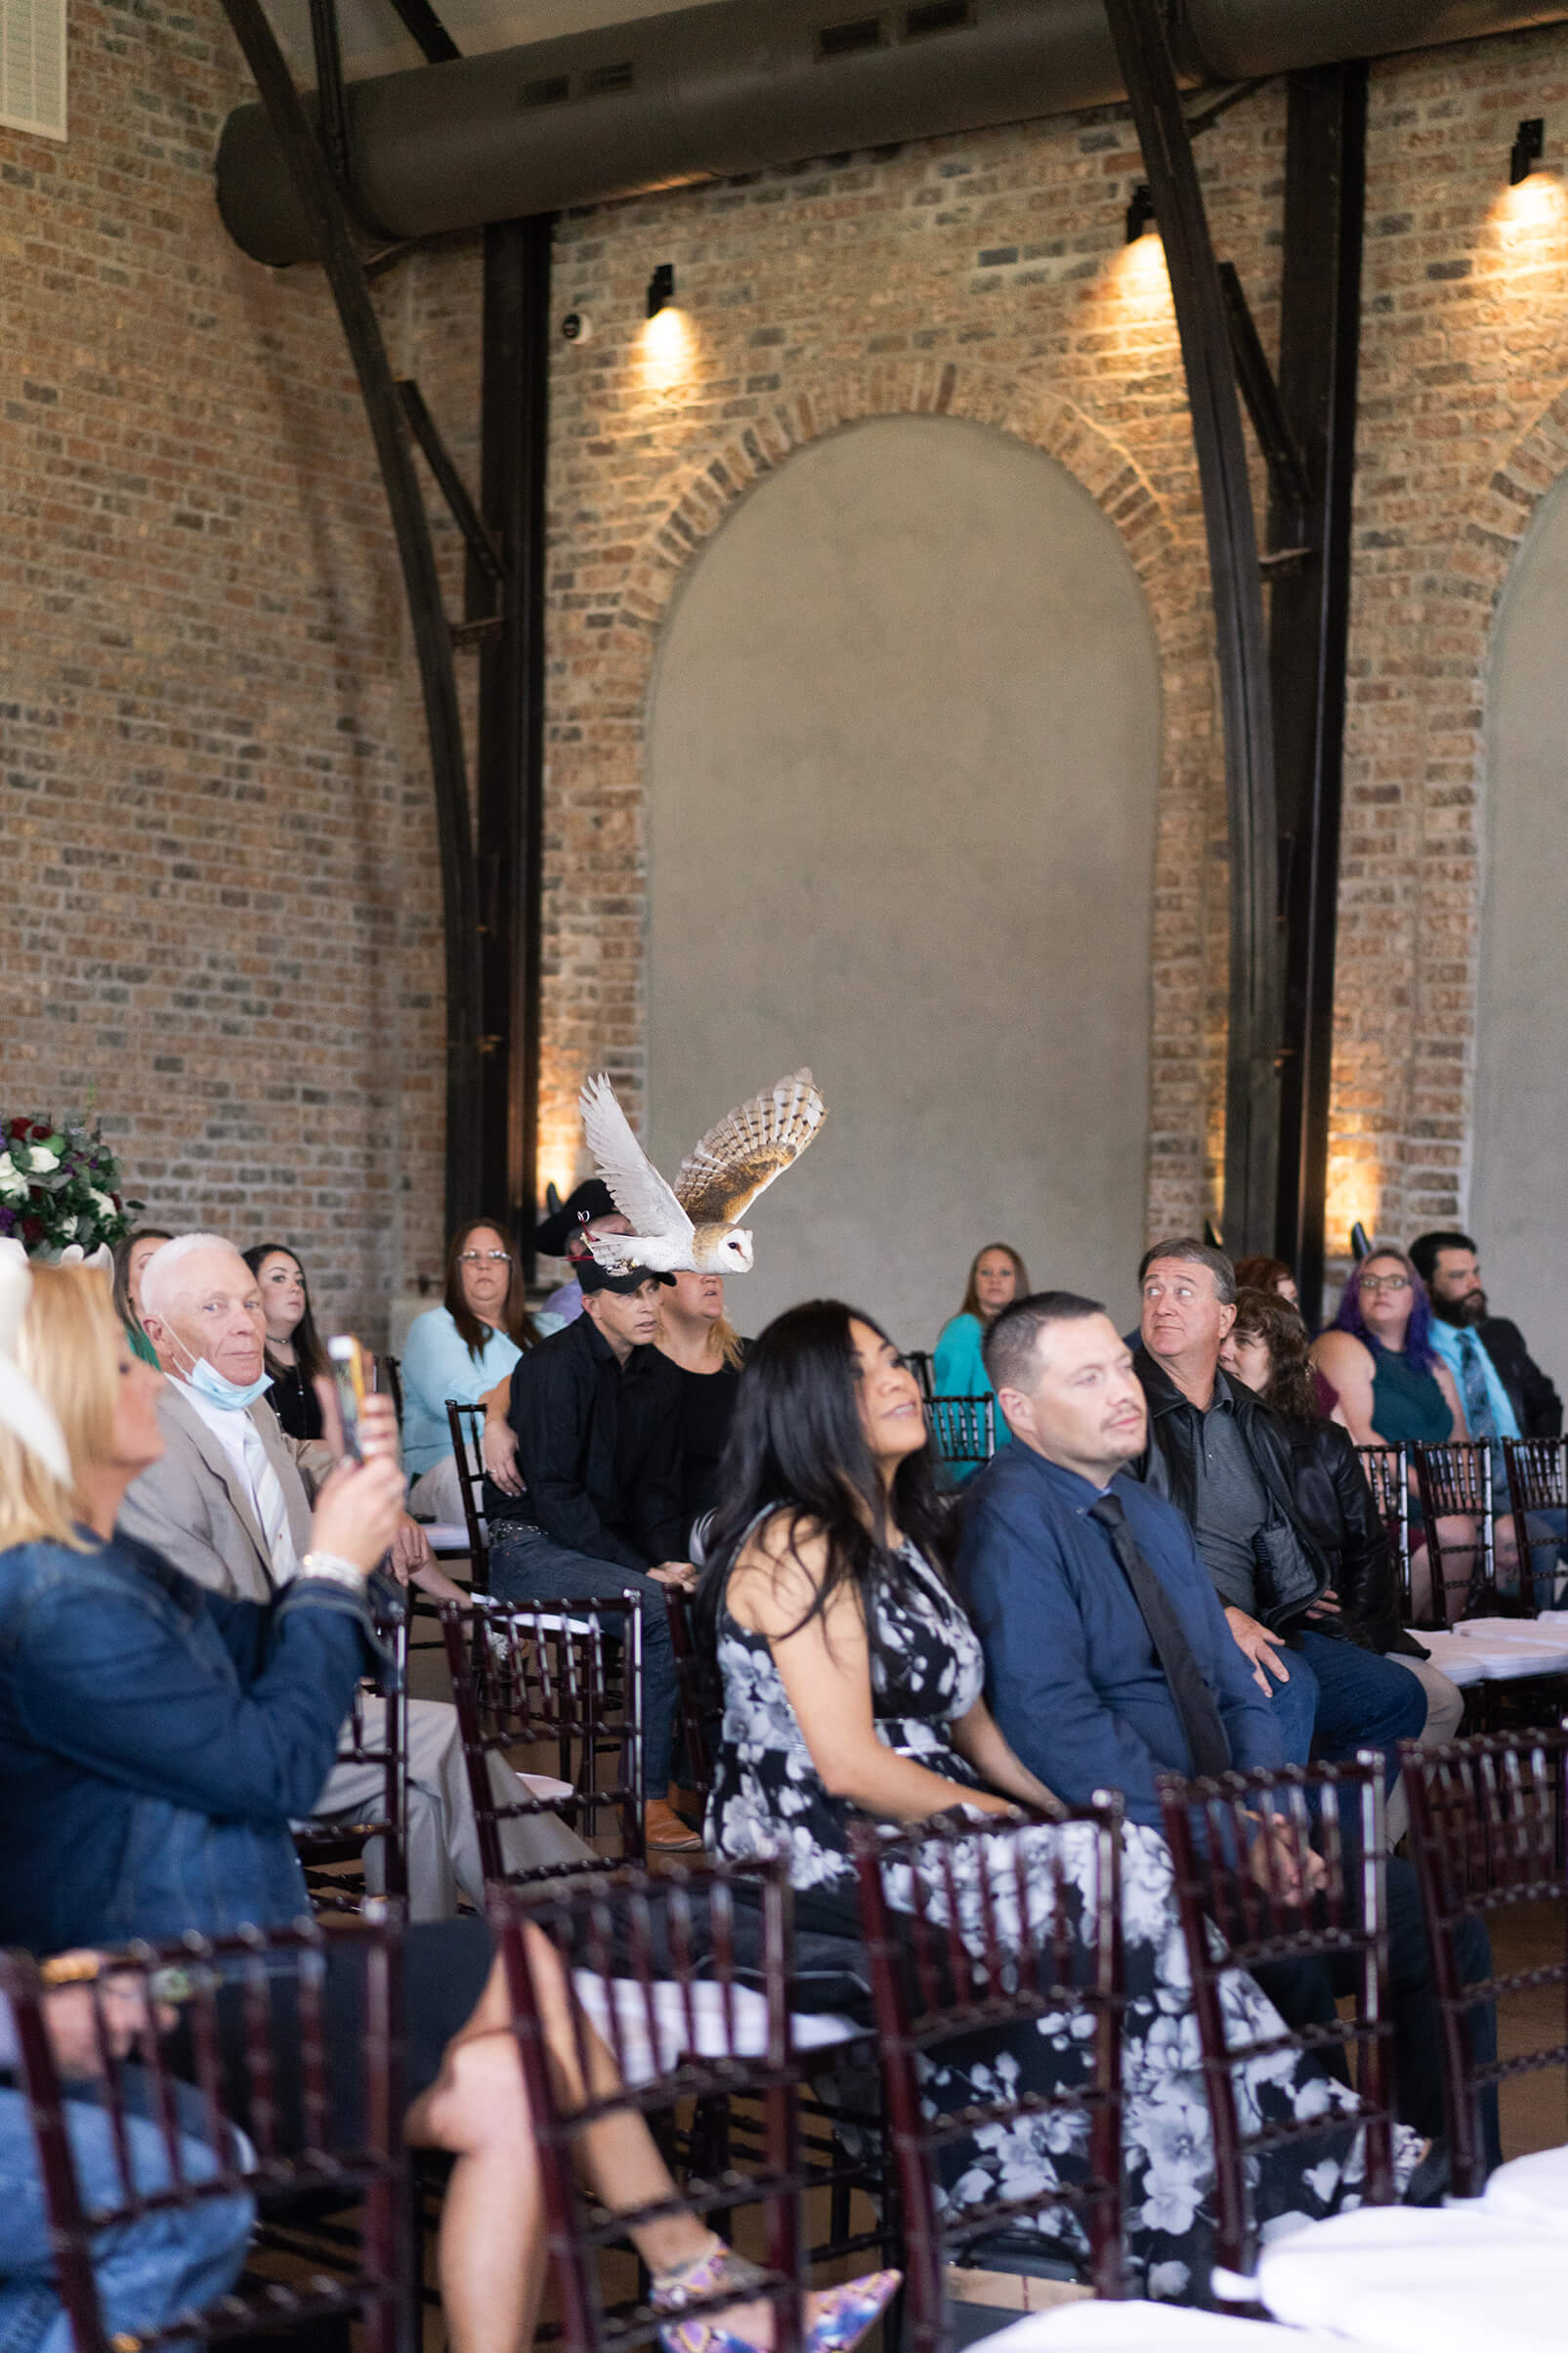 An owl flies with the wedding rings at a Harry Potter wedding at Iron Manor in Houston Texas by Swish and Click Photography